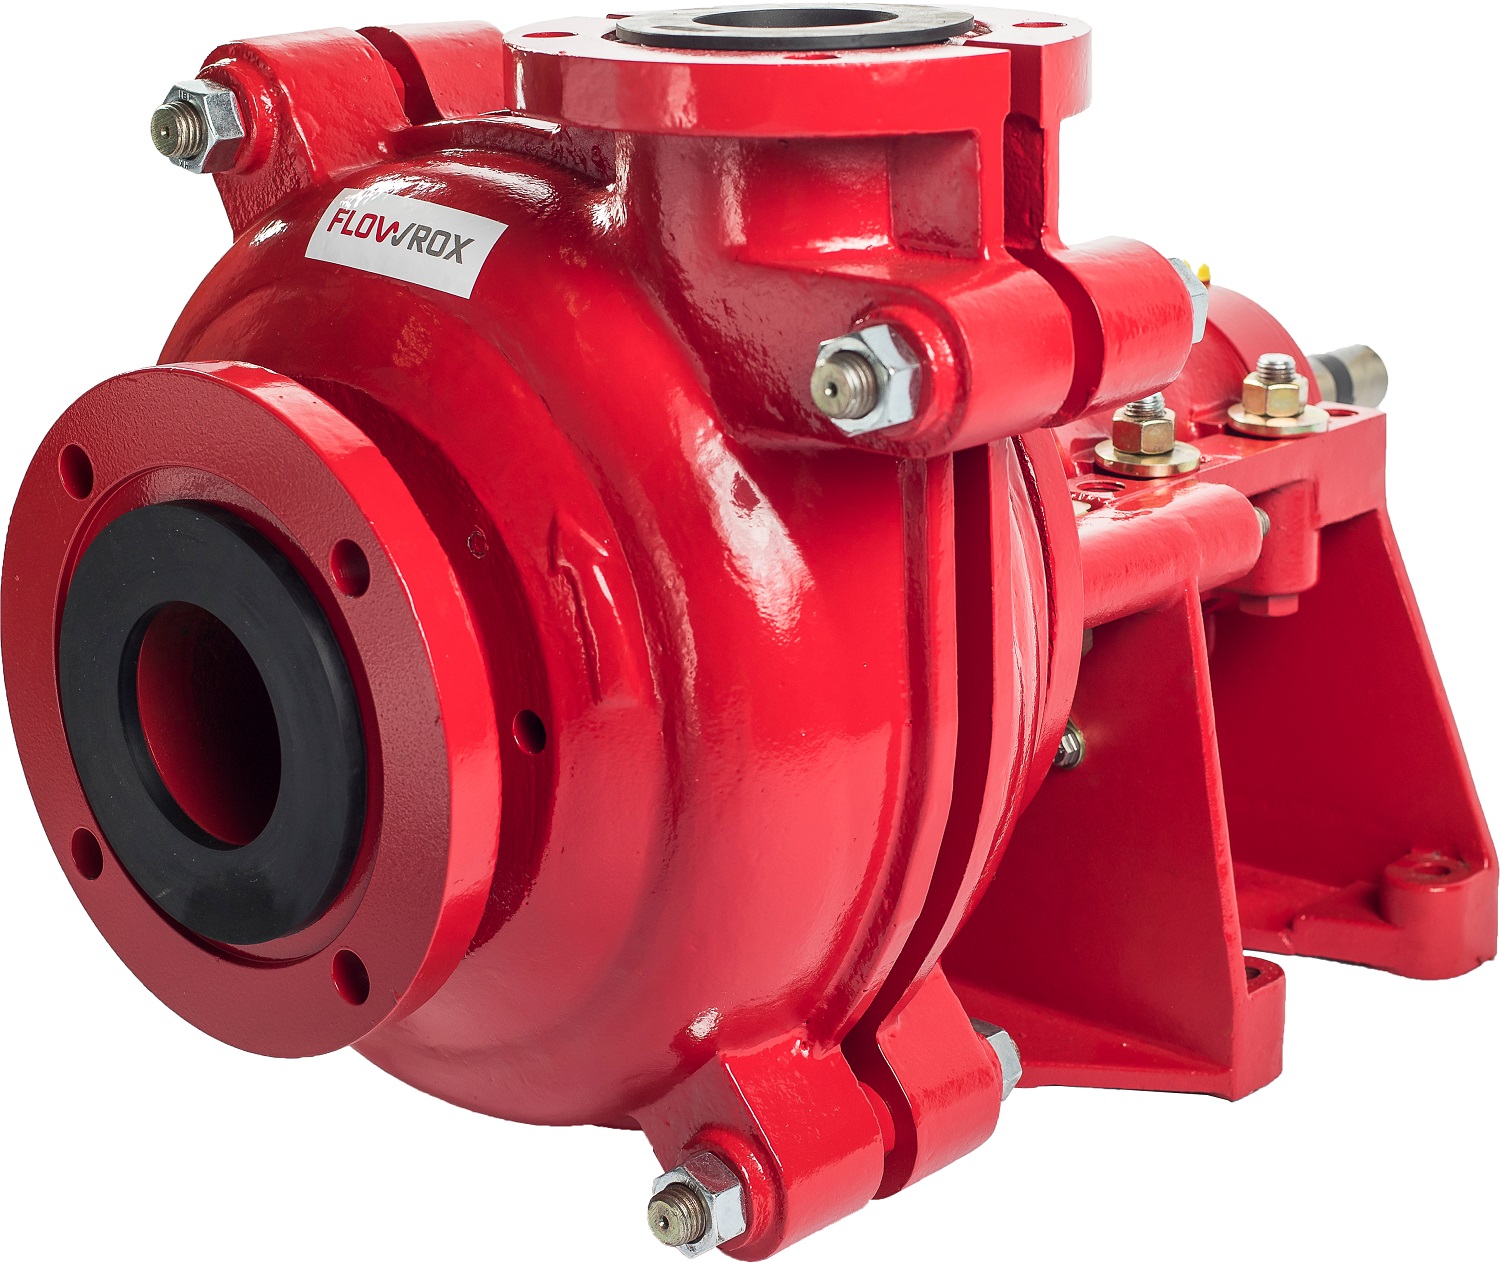 Flowrox CF-S centrifugal pump is designed for pumping applications of corrosive and abrasive slurries.